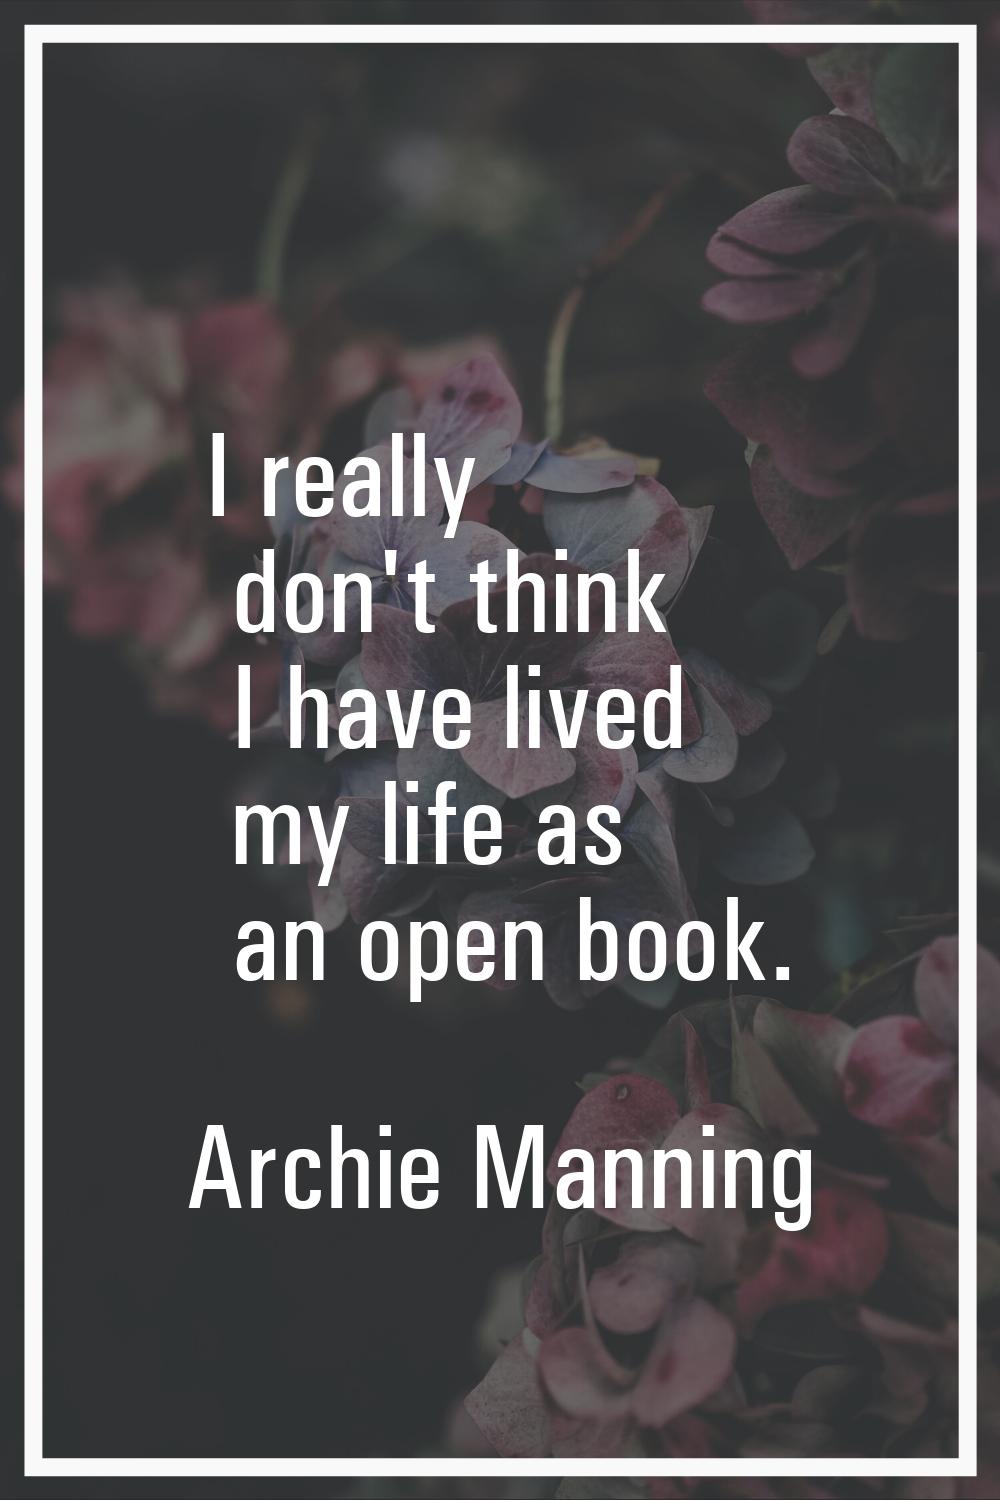 I really don't think I have lived my life as an open book.